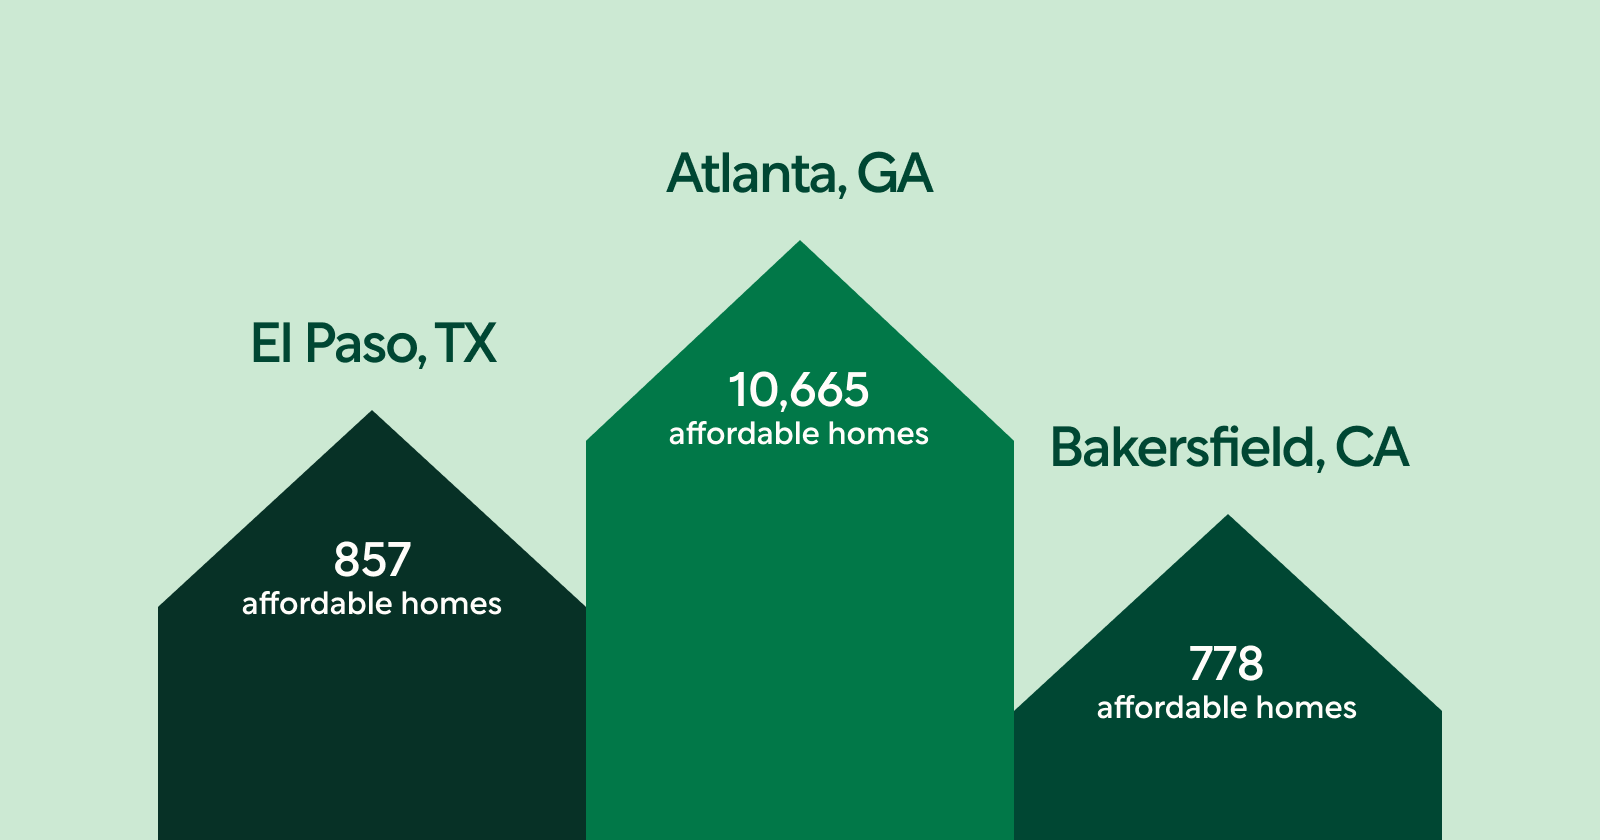 3 Most Affordable Cities Represented by Graphic of 3 Homes of Various Shades of Green: El Paso, Atlanta, Bakersfield